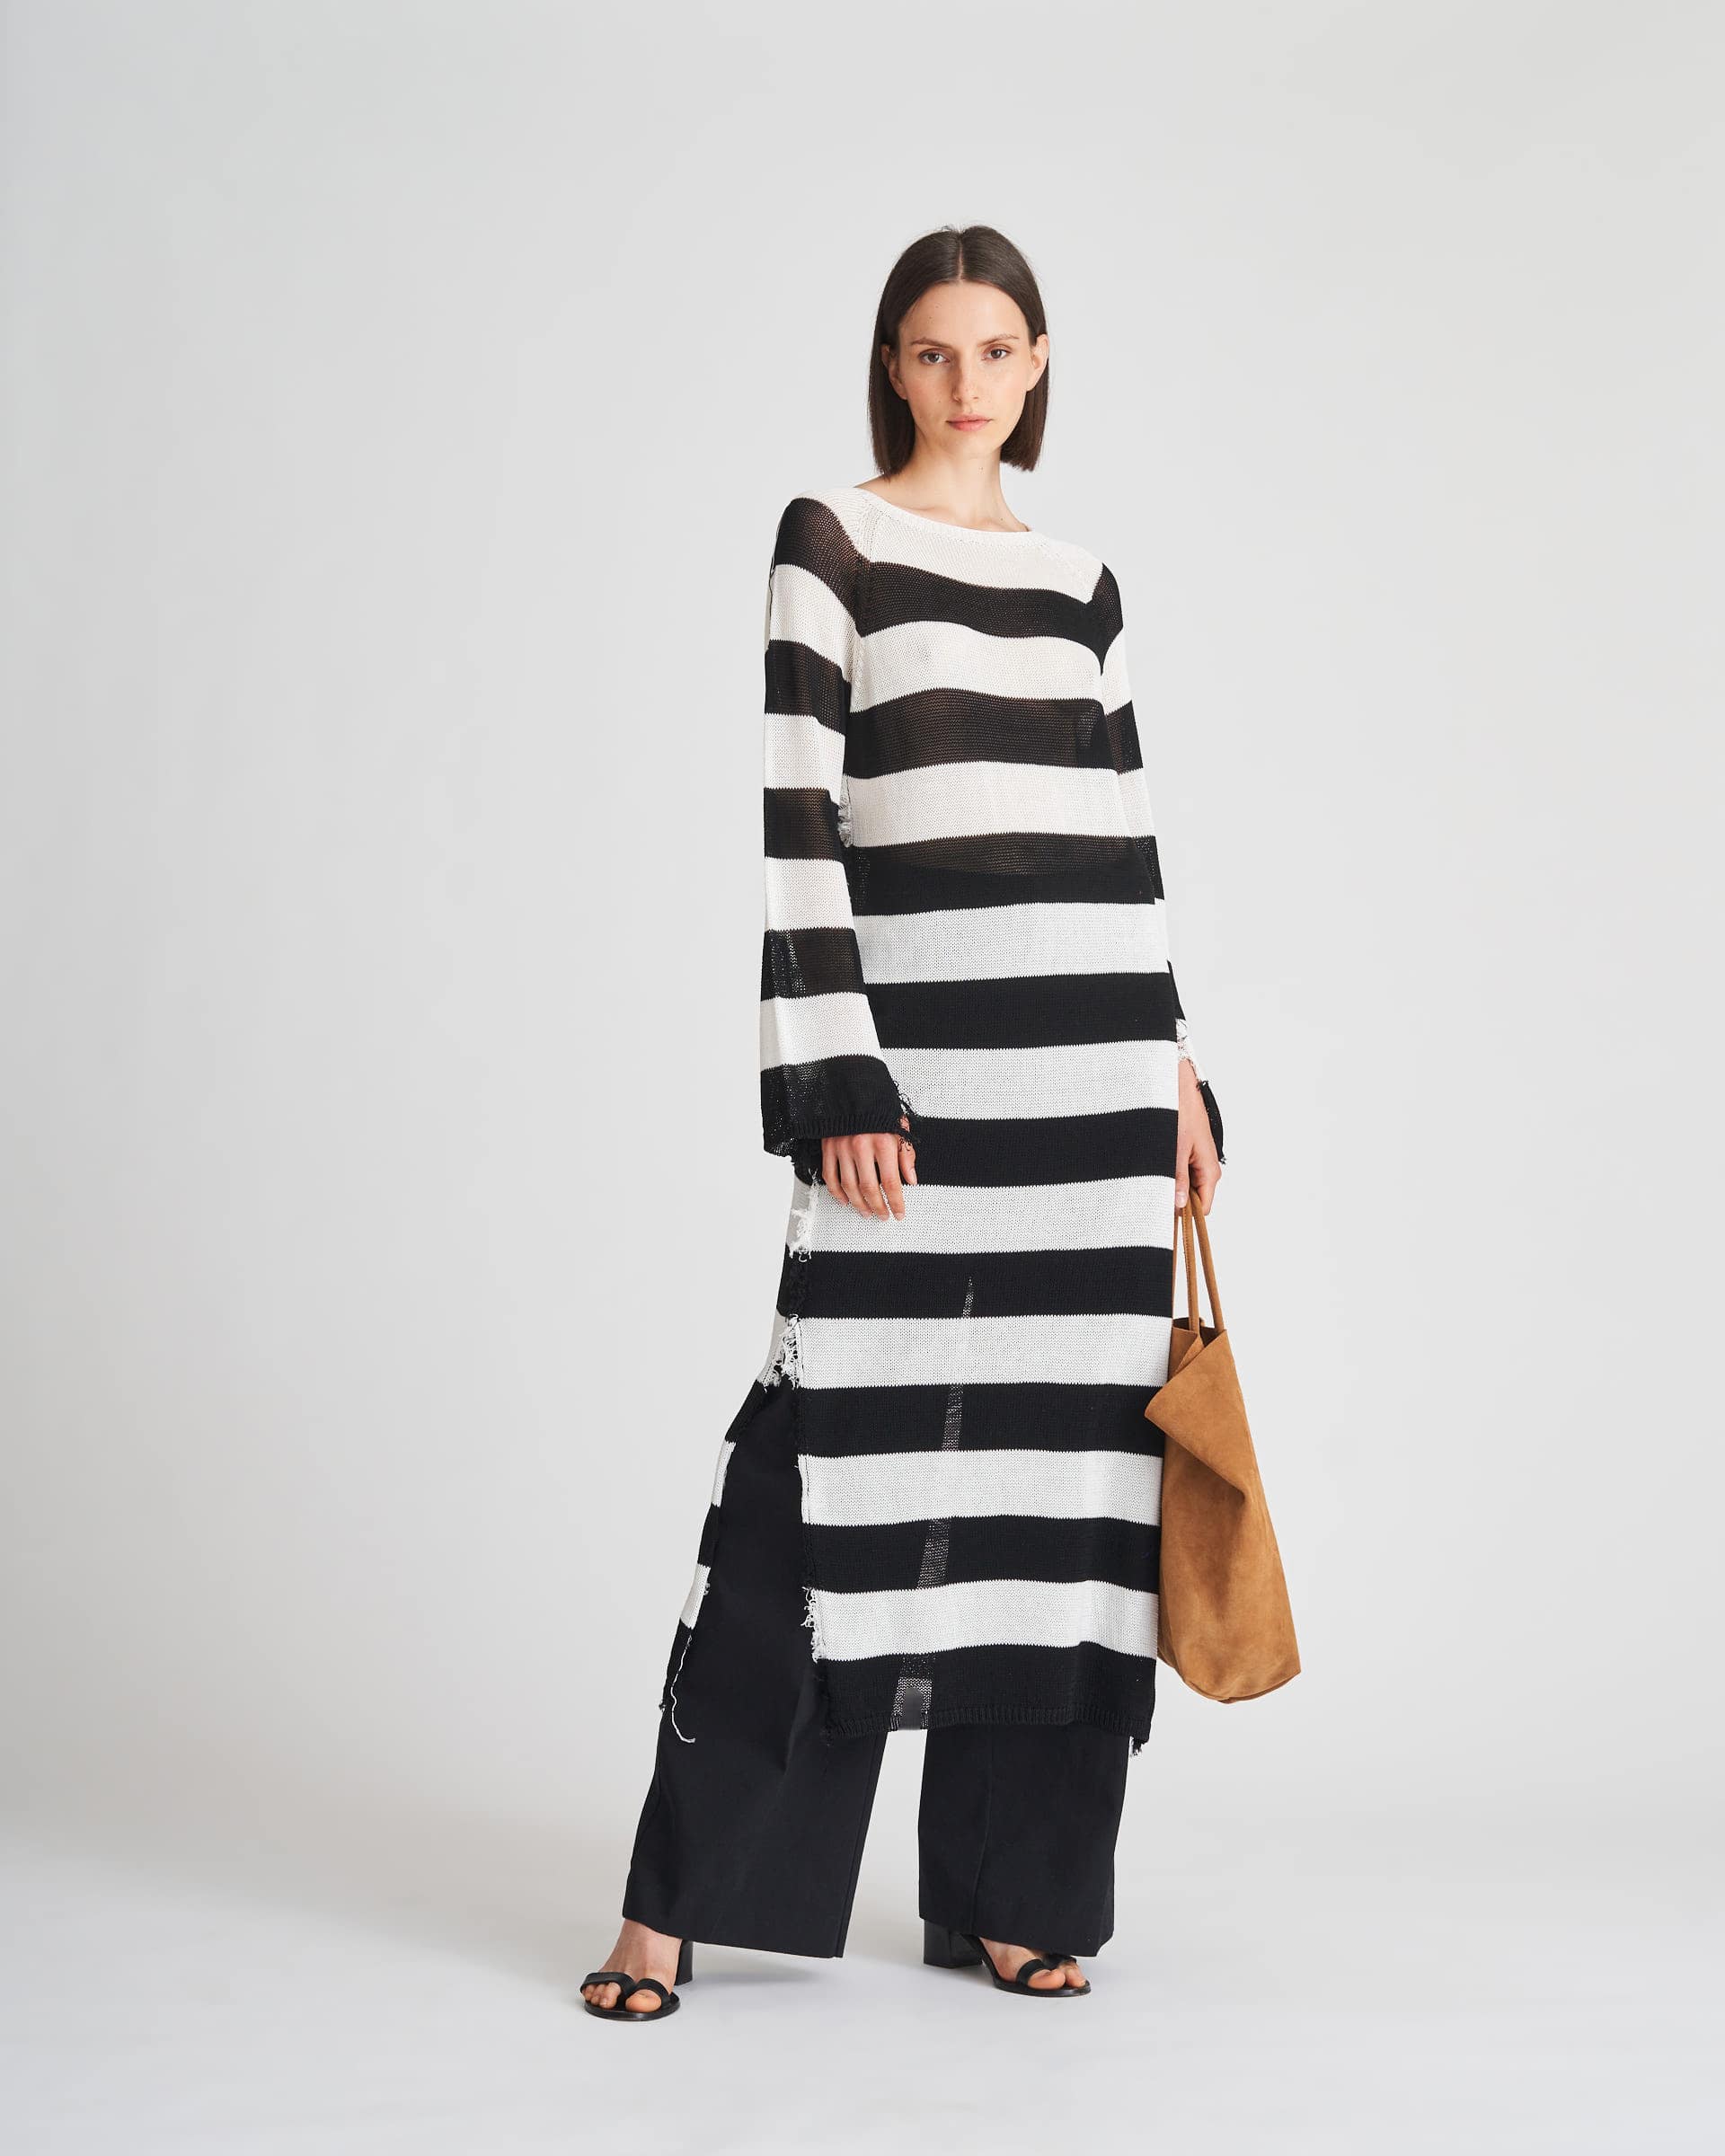 The Market Store | Dress In Fringed Striped Knit